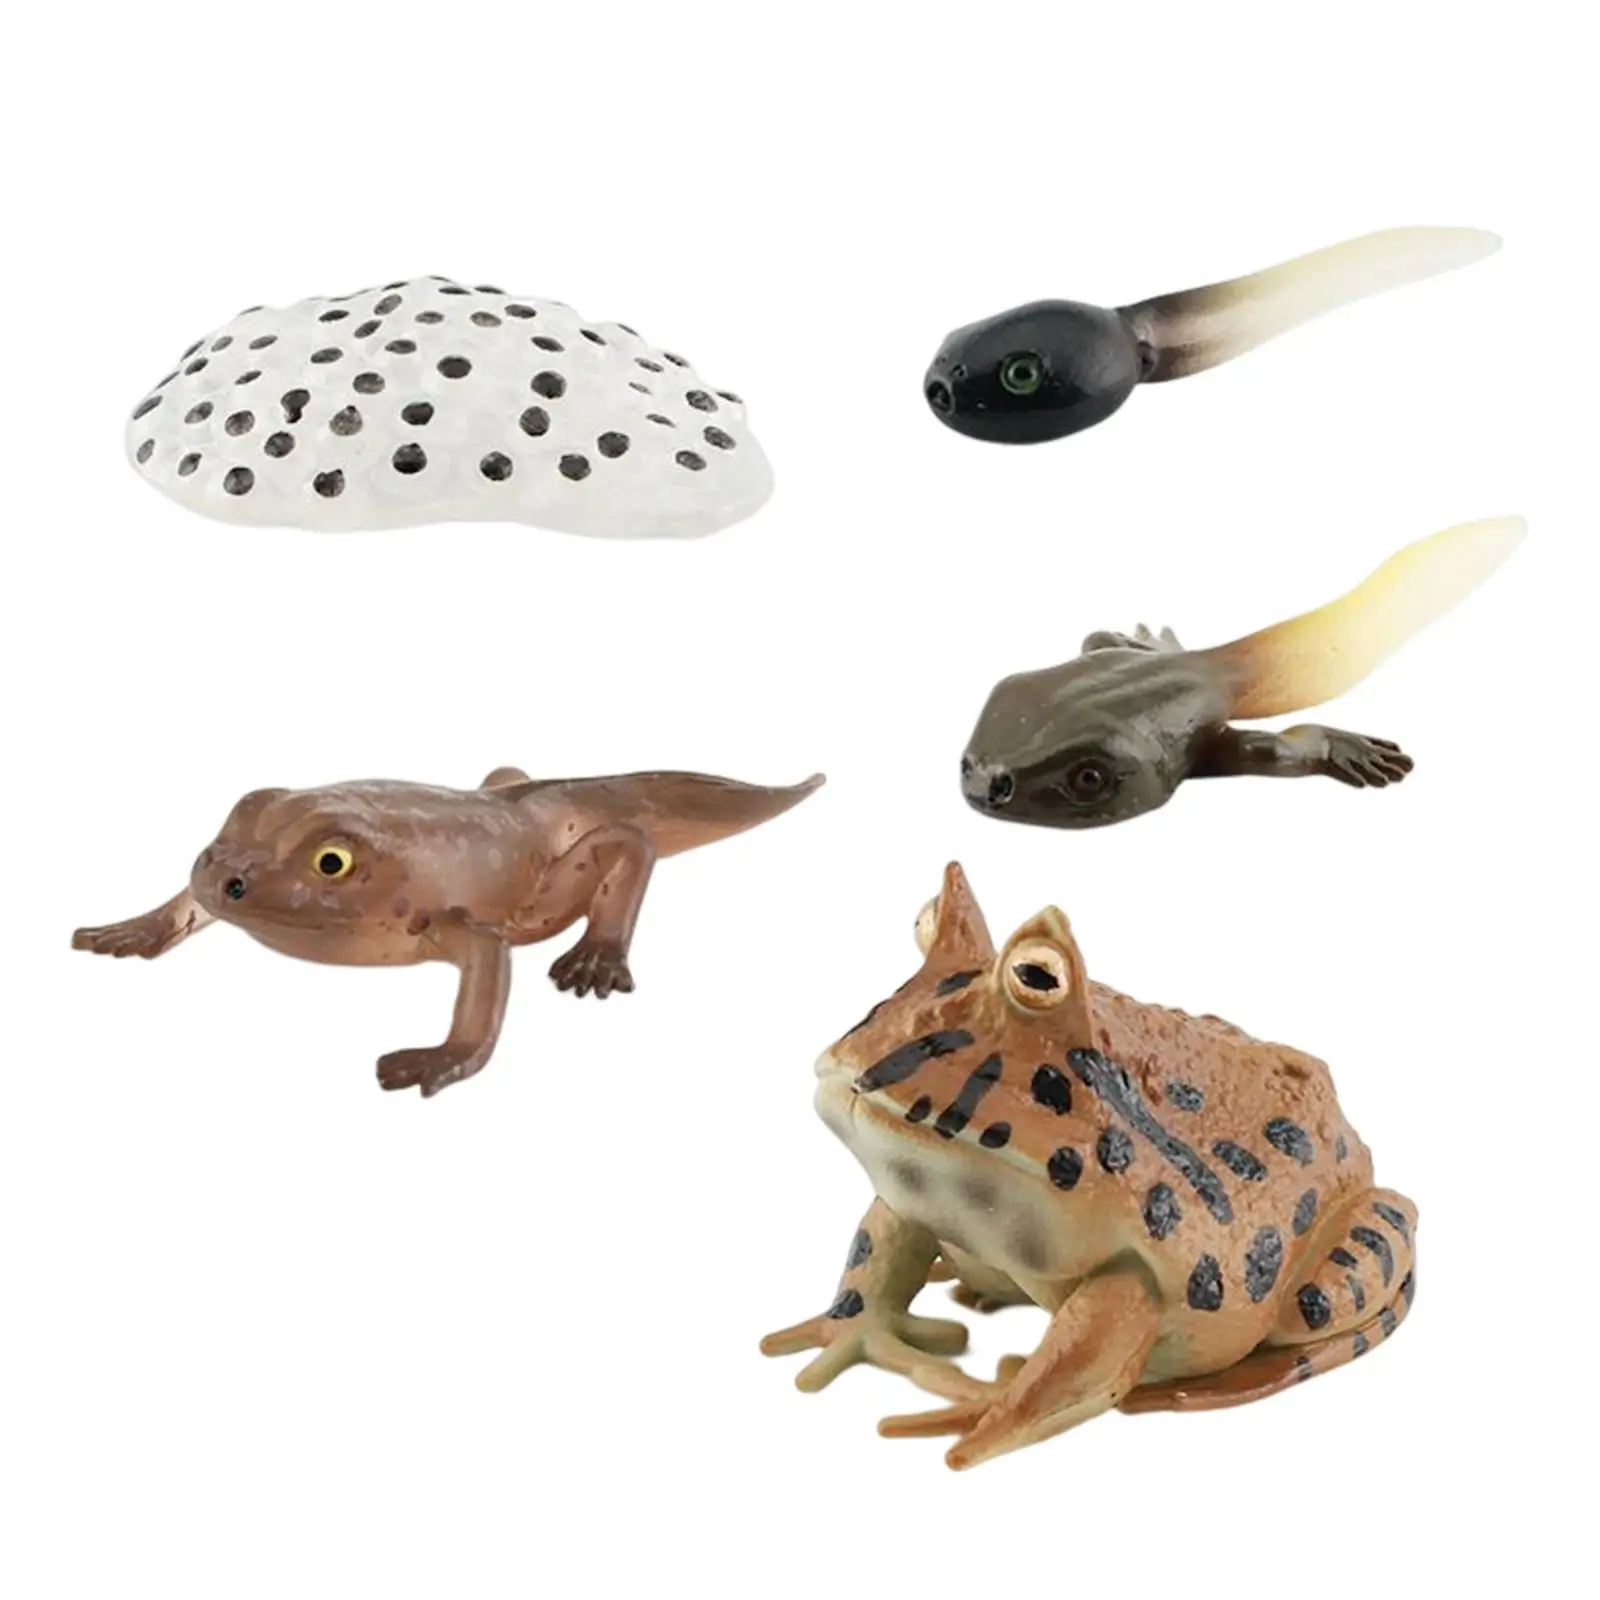 Frogs Life Cycle Model Realistic Animal Figurines for Children Toddlers Kids